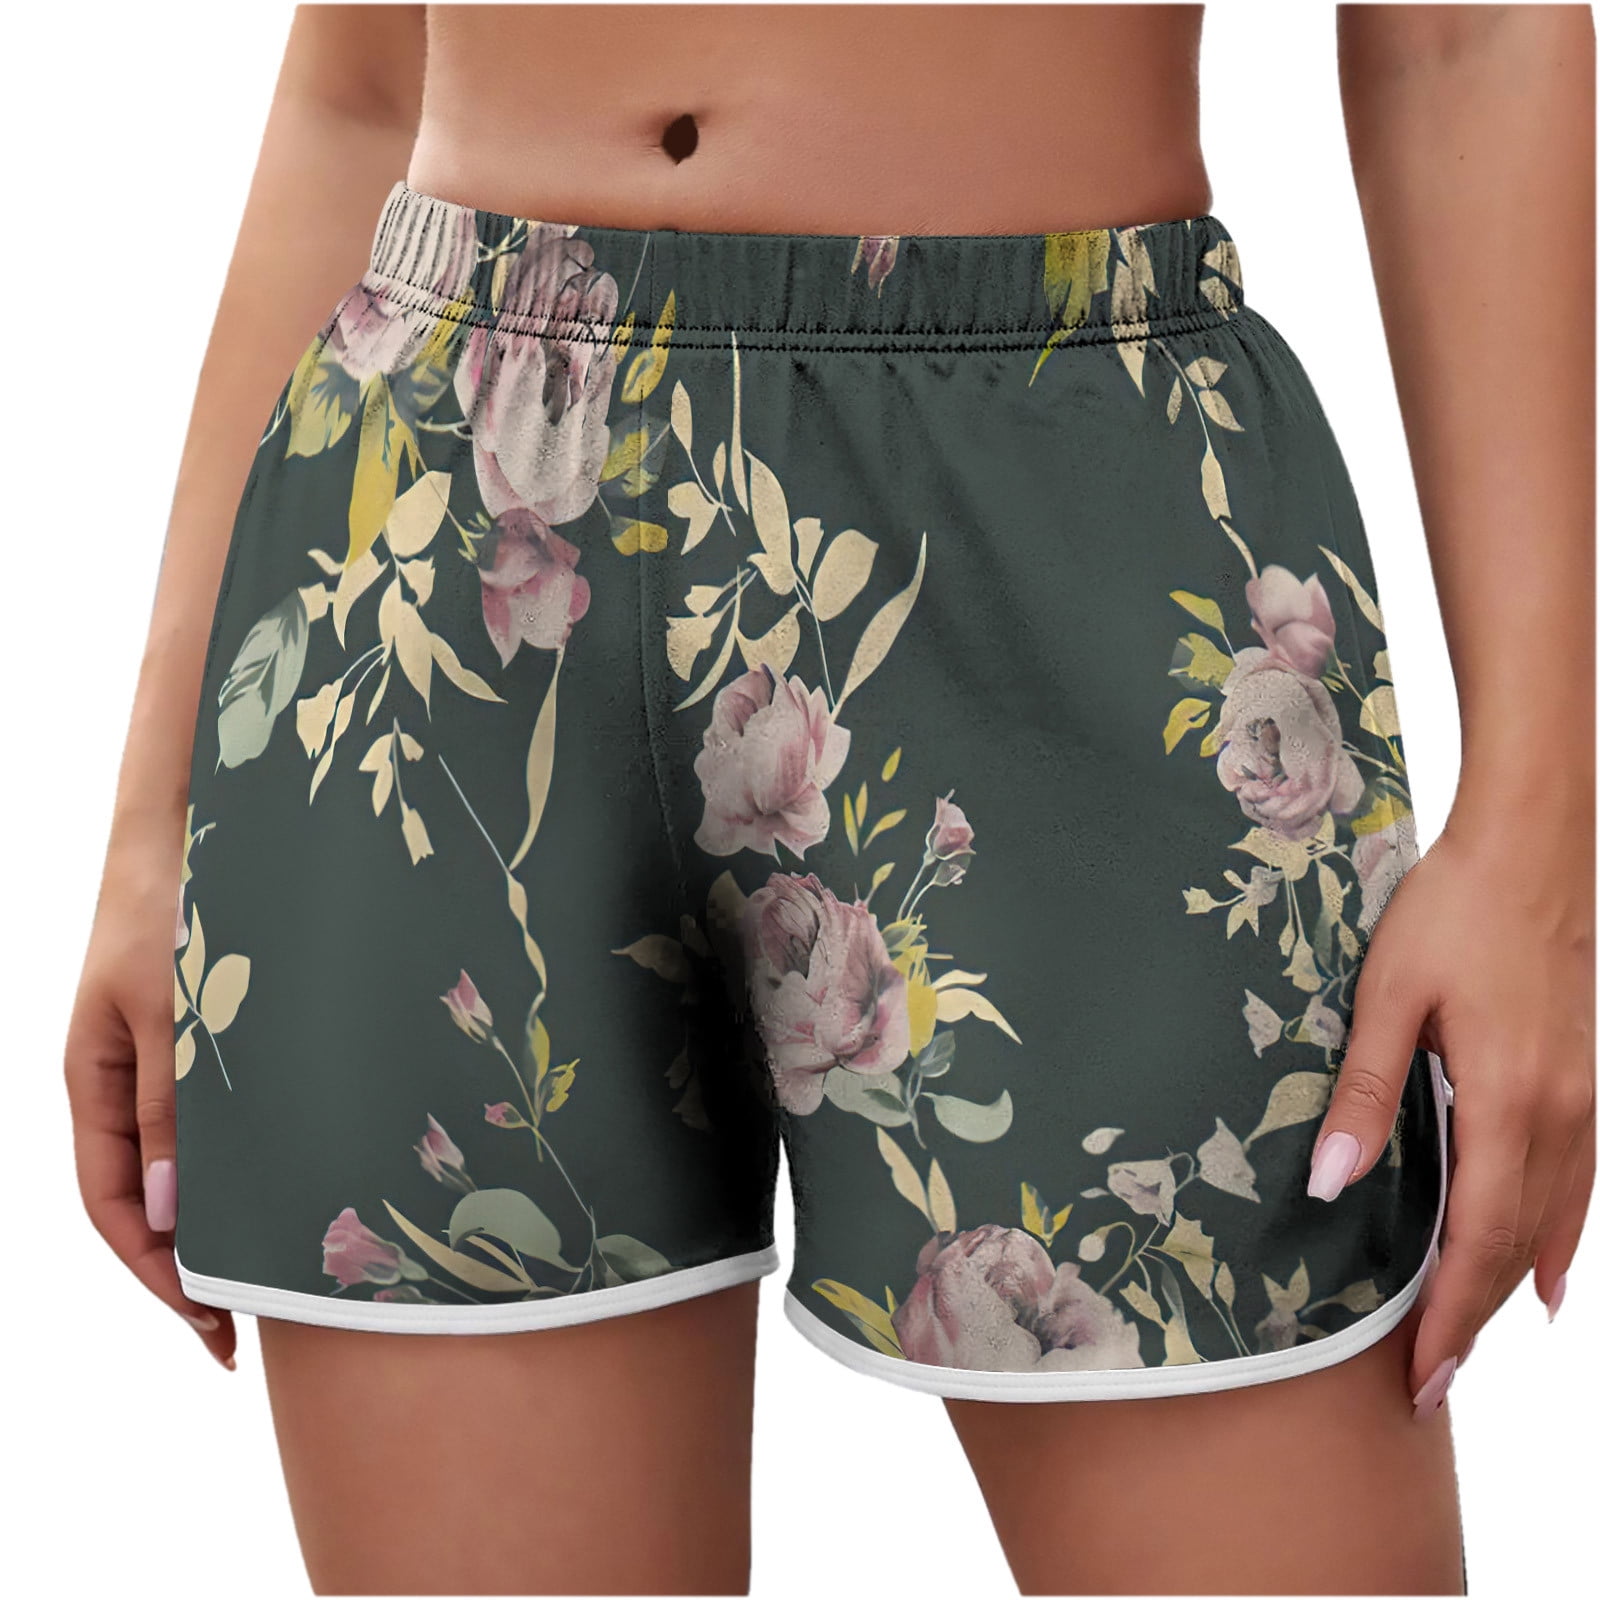 Up to 60% Off! pstuiky Shorts for Women, Women Summer Printed Beach Shorts  Stretch High-Waisted Shorts Sales Today Clearance Hot Pink XXL